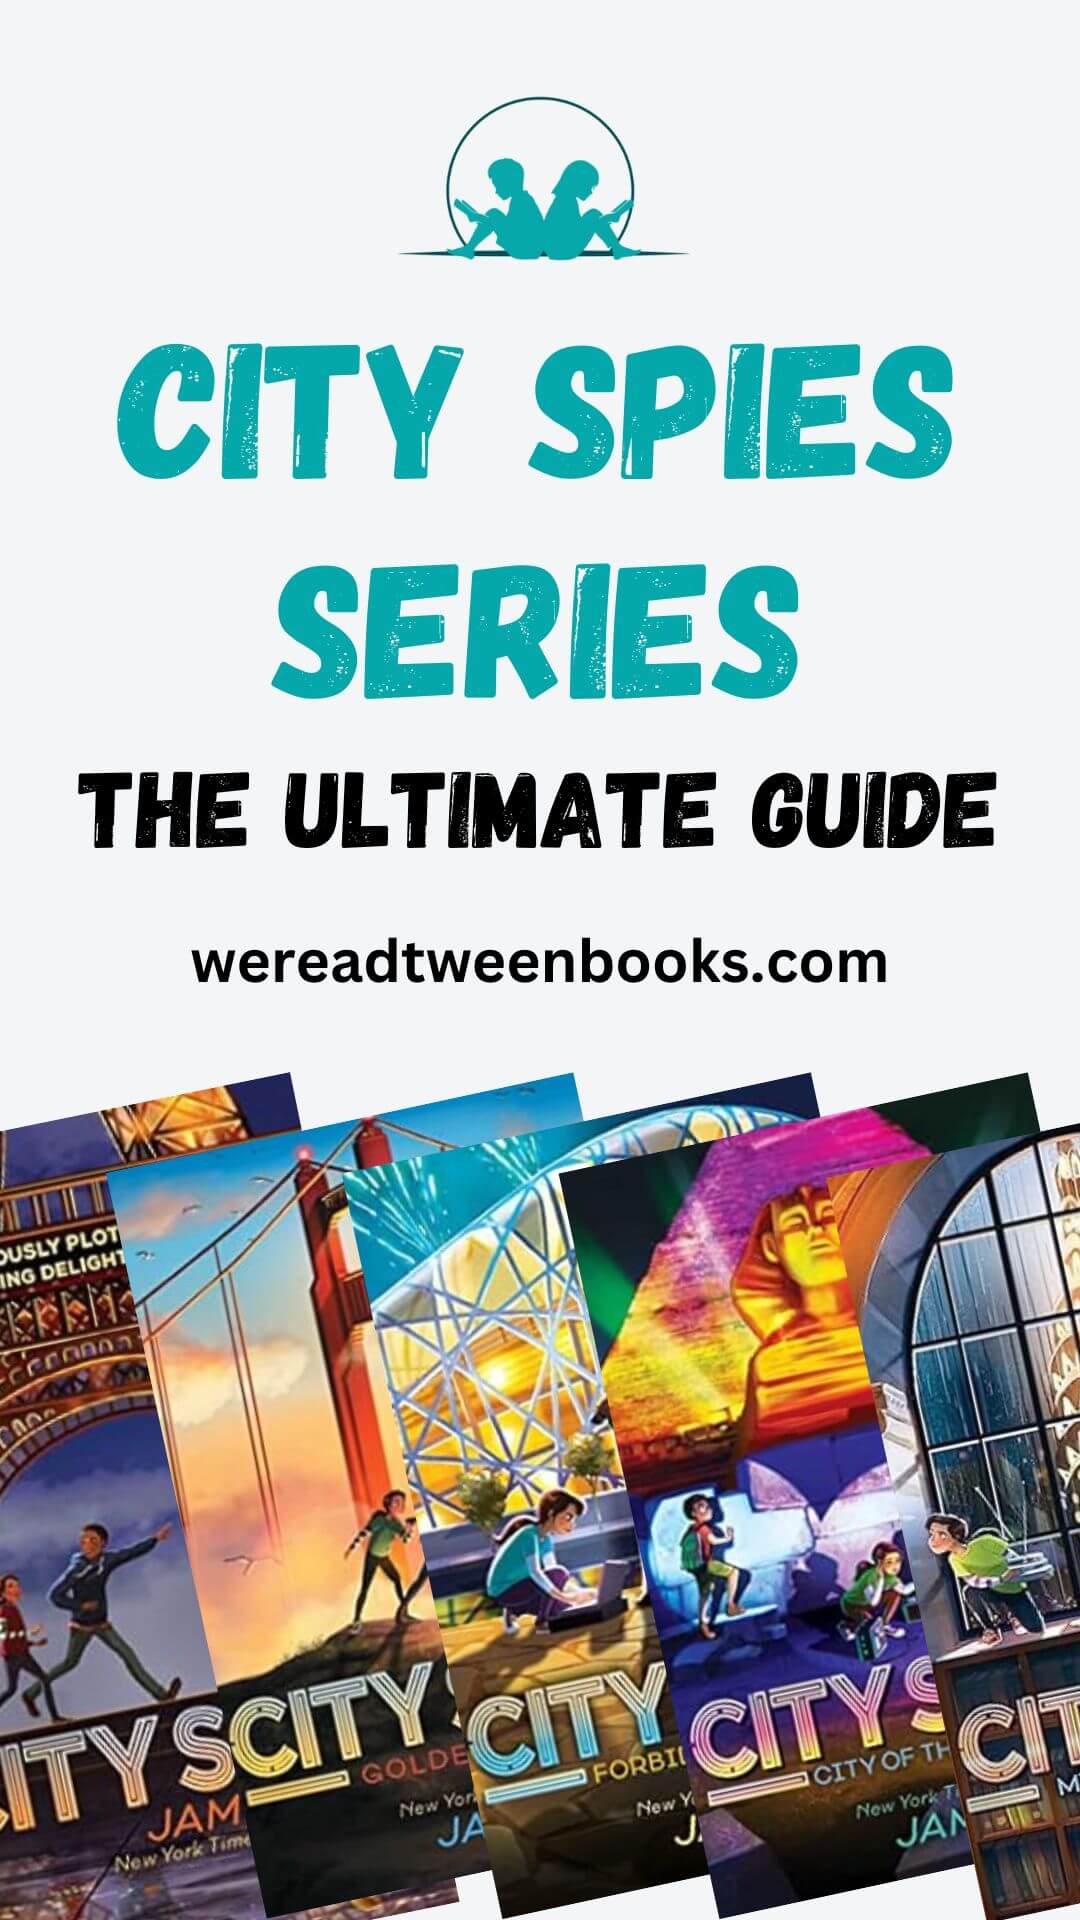 Check out the complete guide to City Spies series in order on We Read Tween Books if your tween reader loves books about adventure and spies!